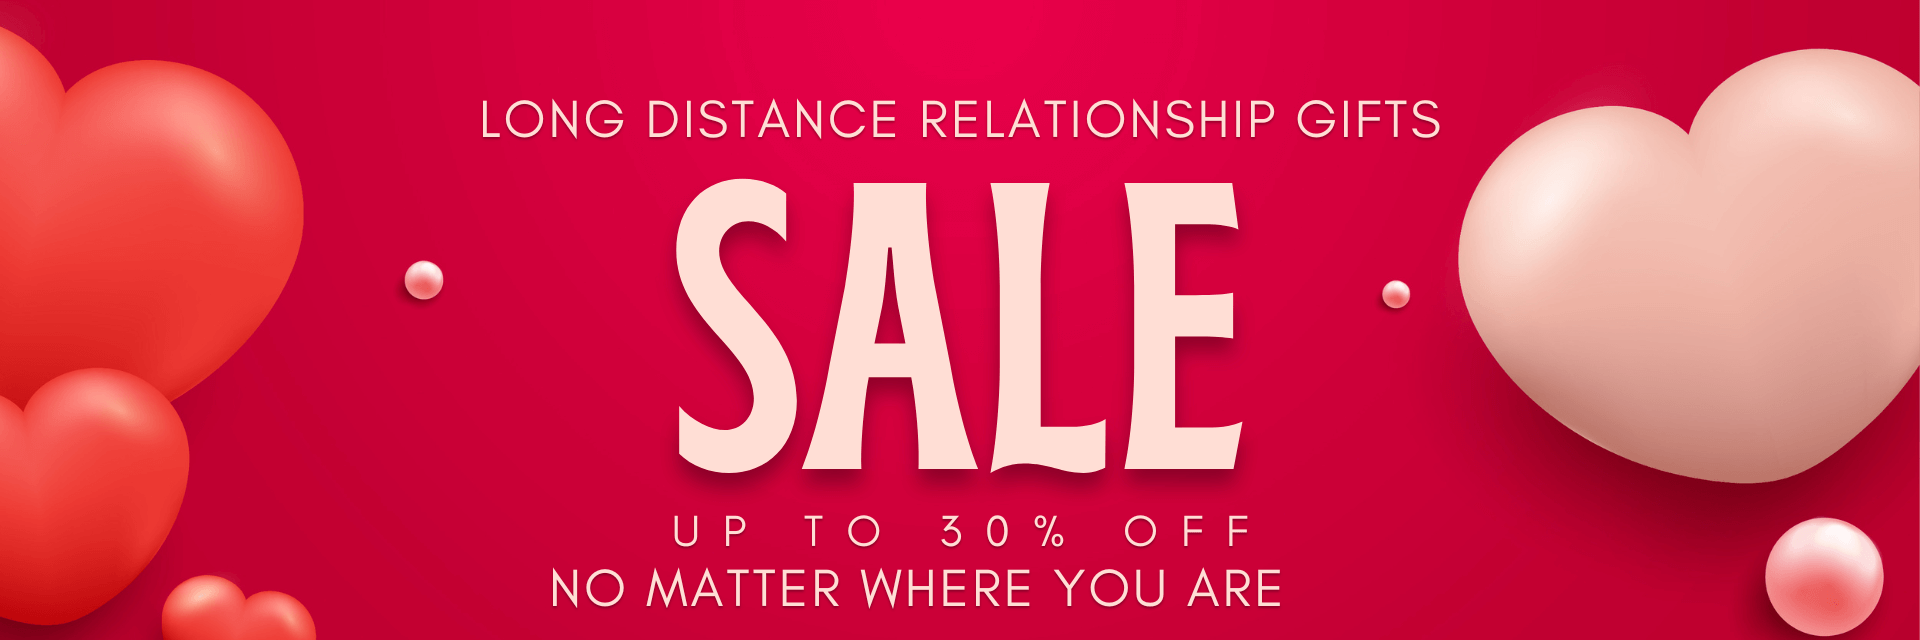 relationship gifts distance gifts